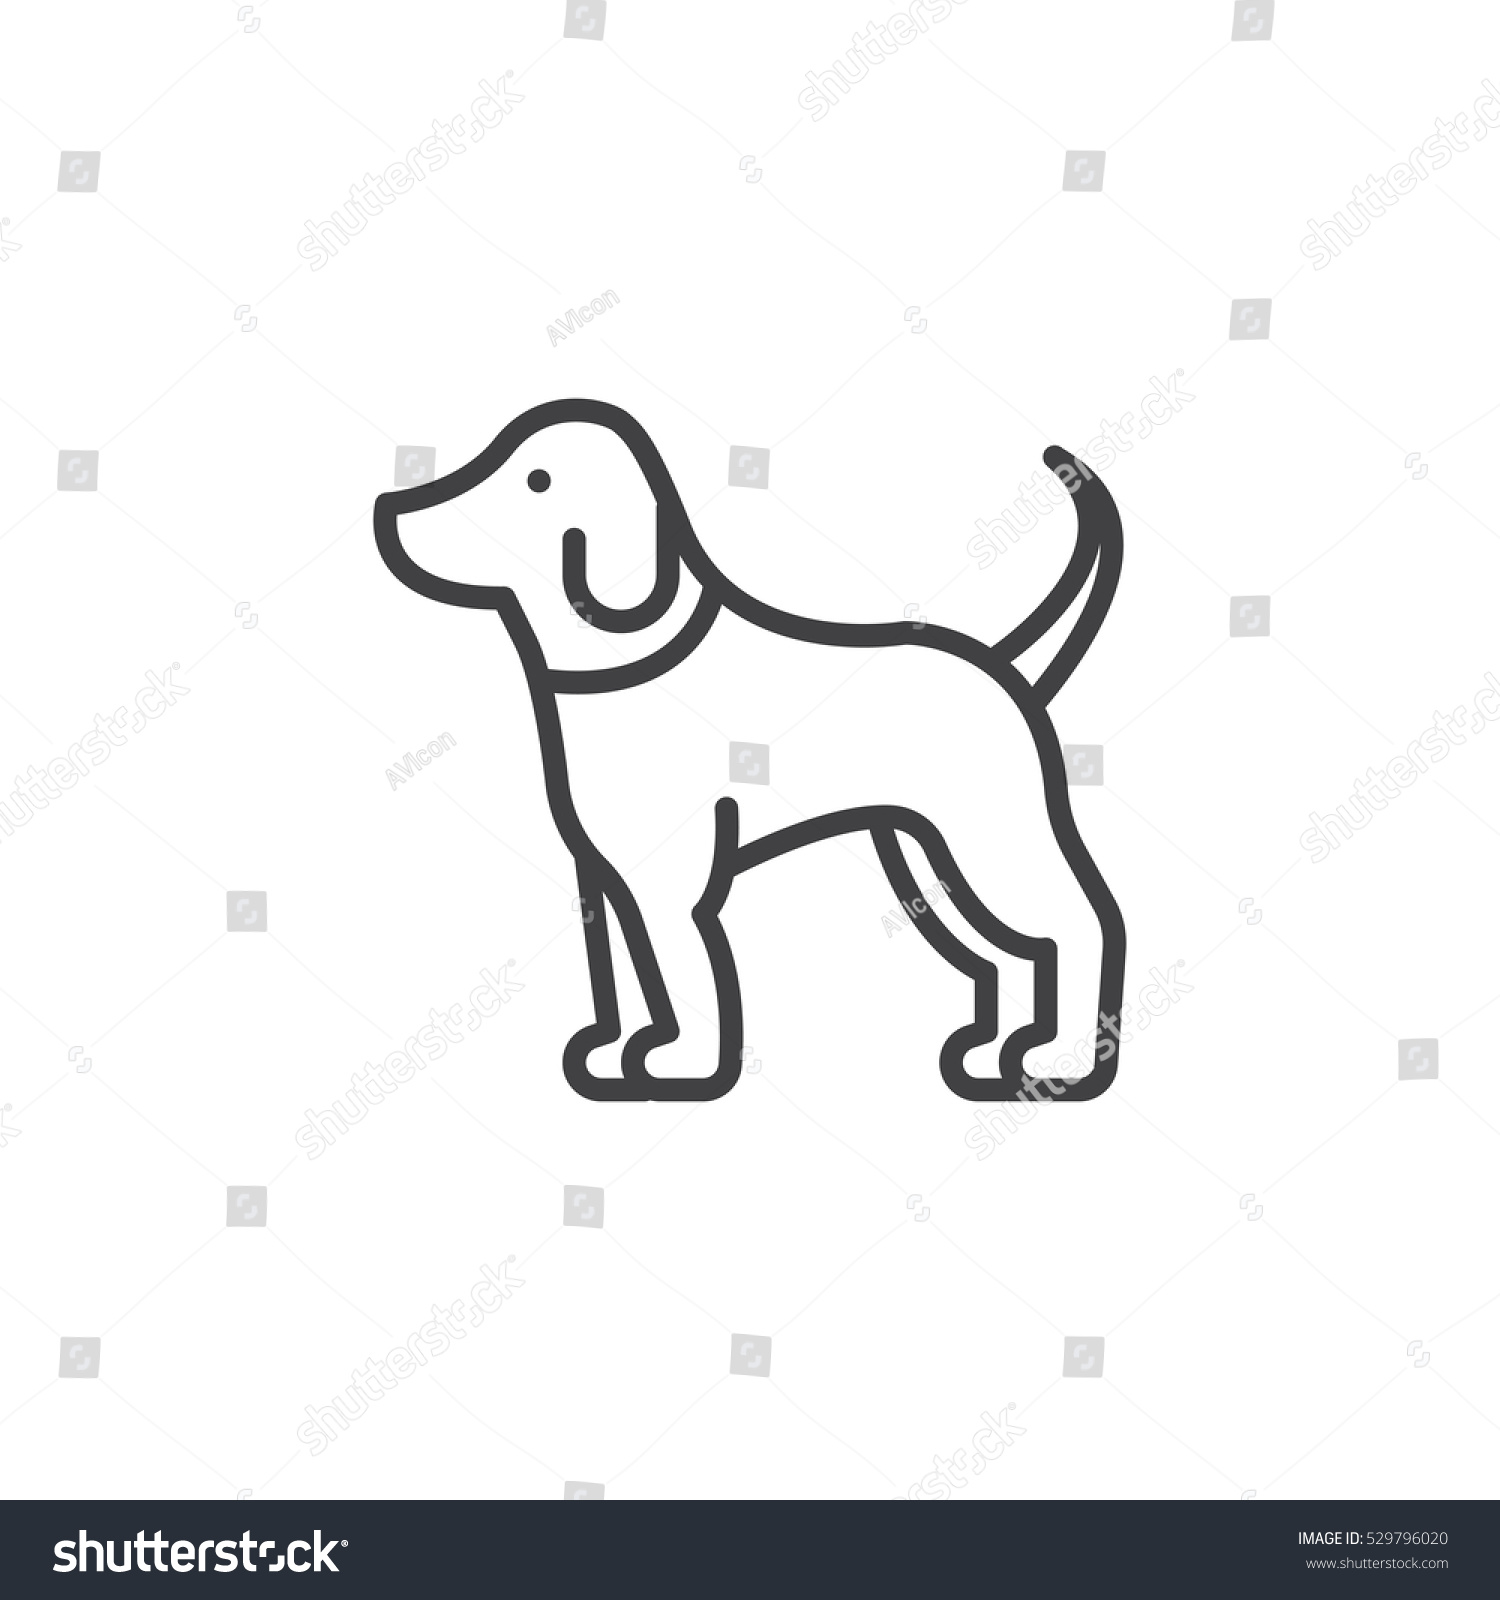 27,005 Dog linear icon Images, Stock Photos & Vectors | Shutterstock